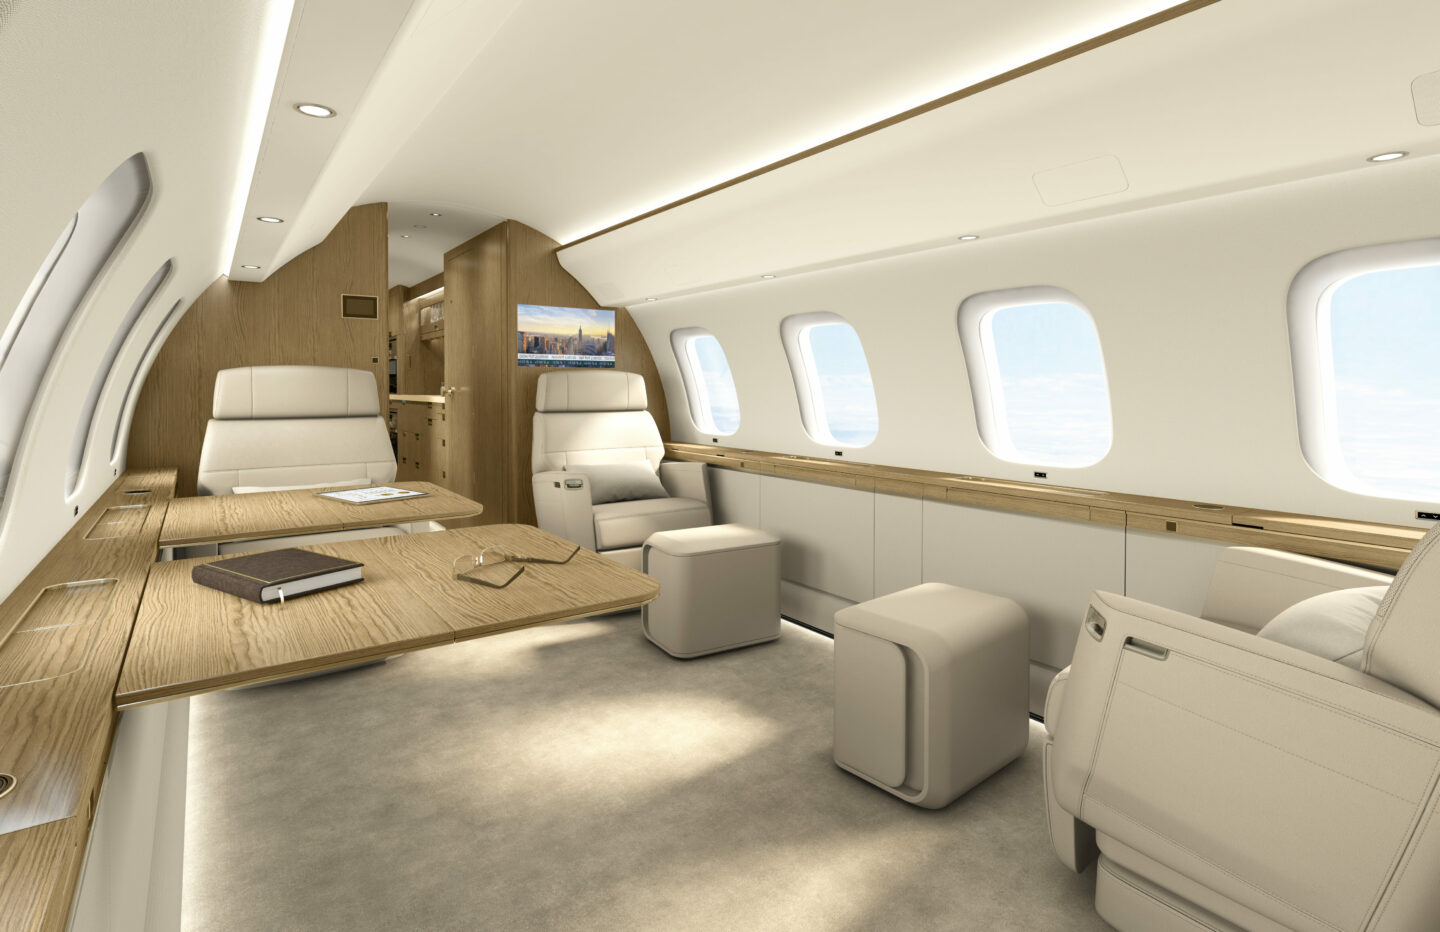 Bombardier Introduces Executive Cabin, Industrys Most Spacious Three-Workspace Interior for Global 7500 and Global 8000 Aircraft